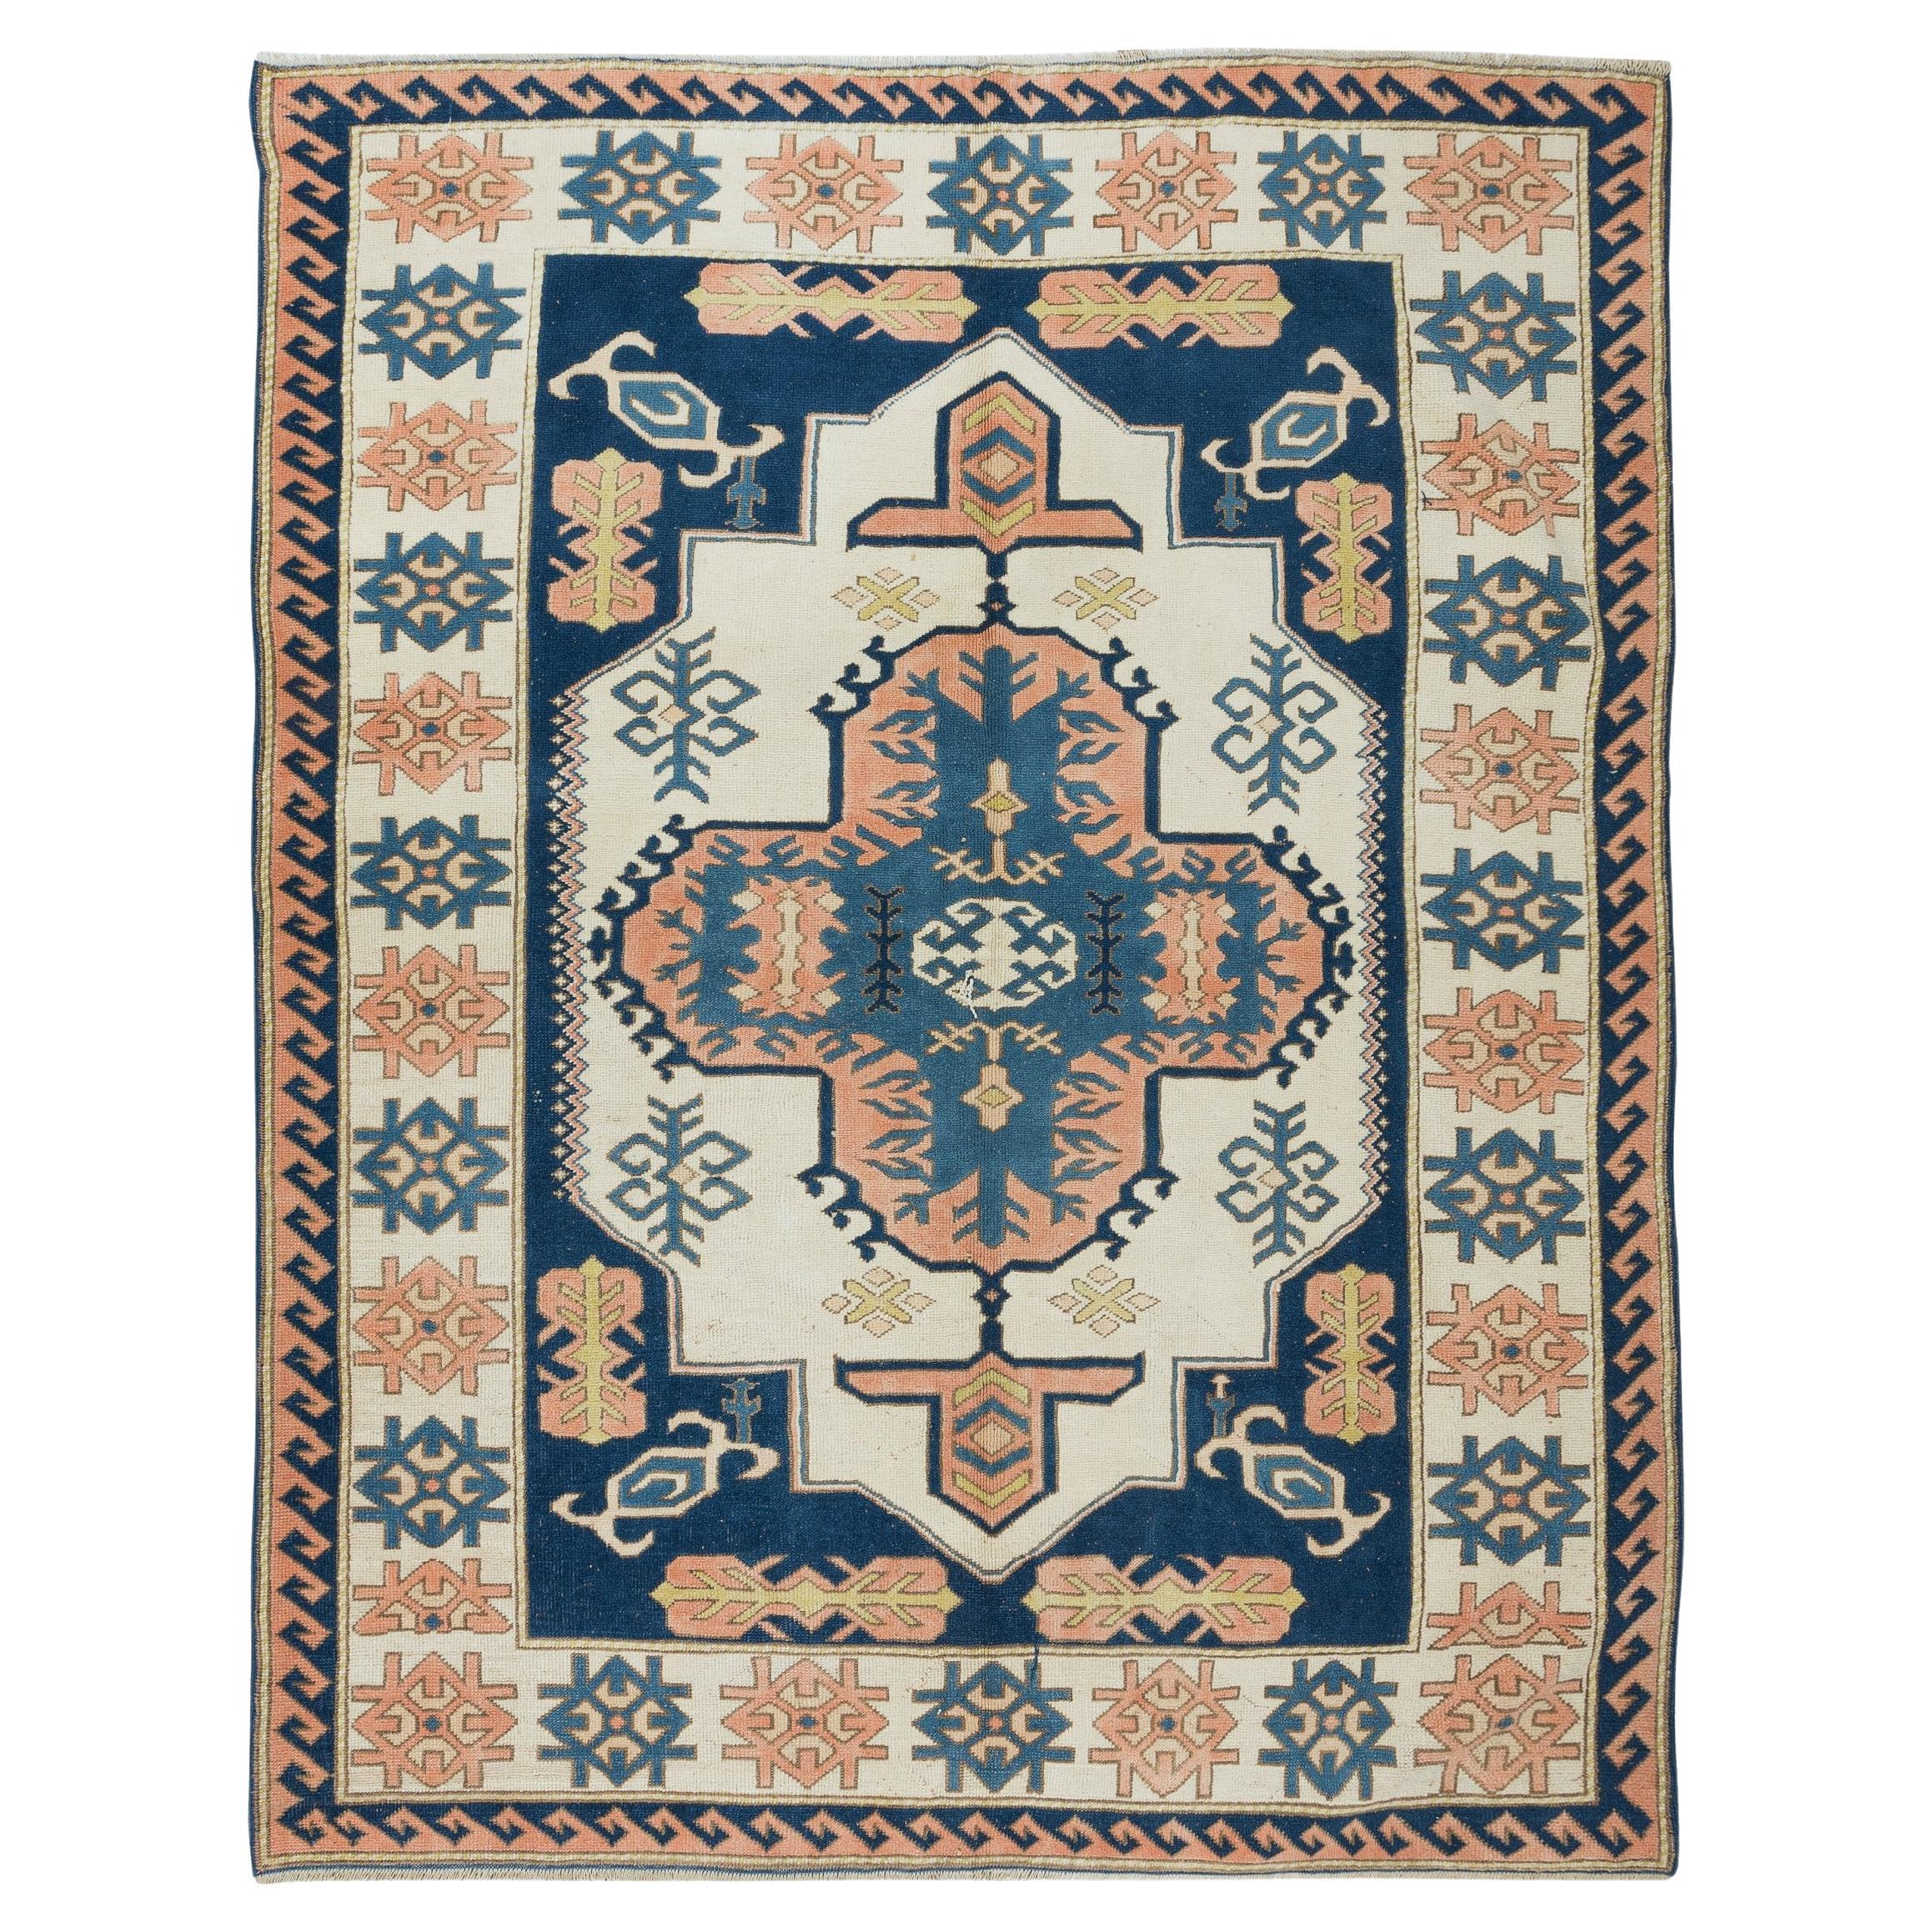 7.3x9.2 Ft Contemporary Handmade Area Rug, Vintage Geometric Carpet, All Wool For Sale